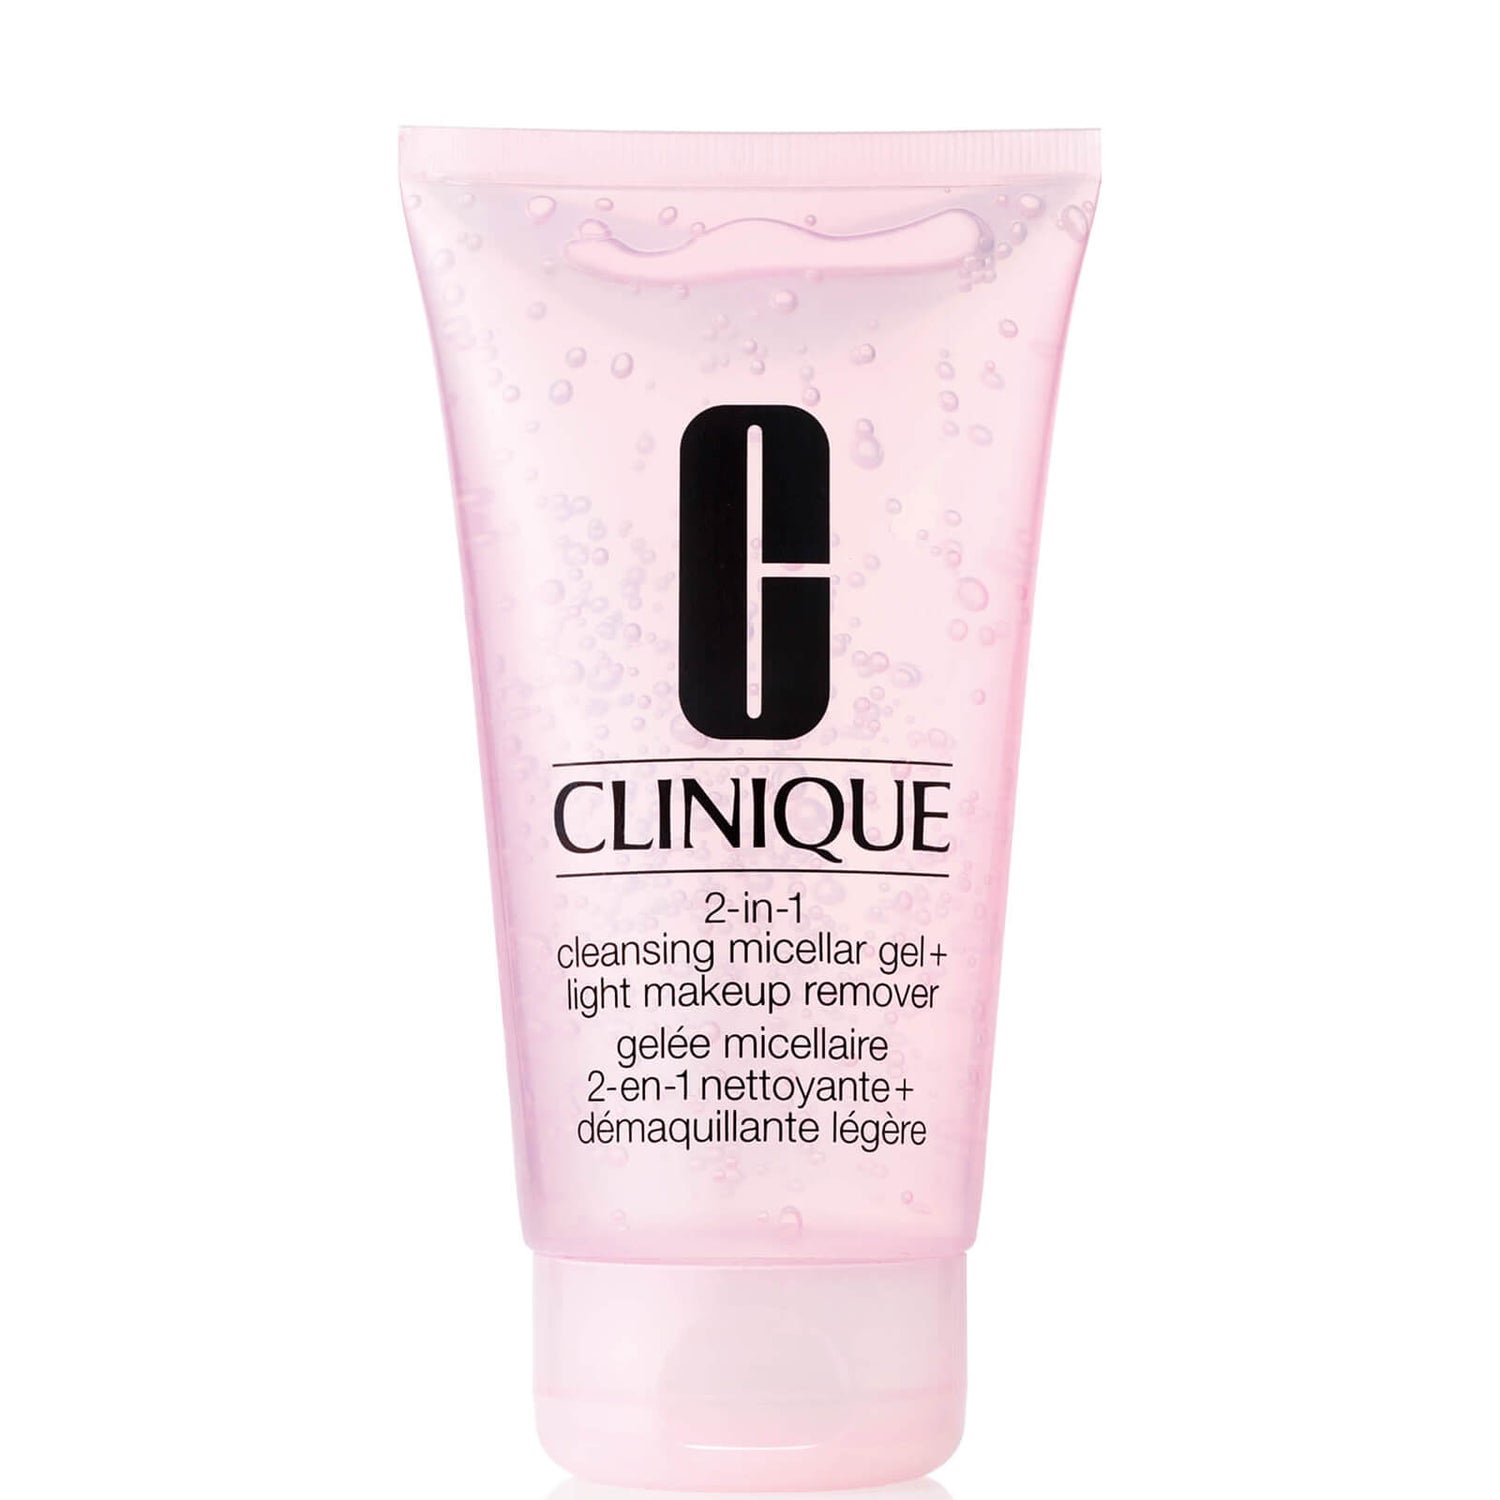 Clinique 2-in-1 Cleansing Micellar Gel + Light Makeup Remover - gel detergente micellare 150 ml